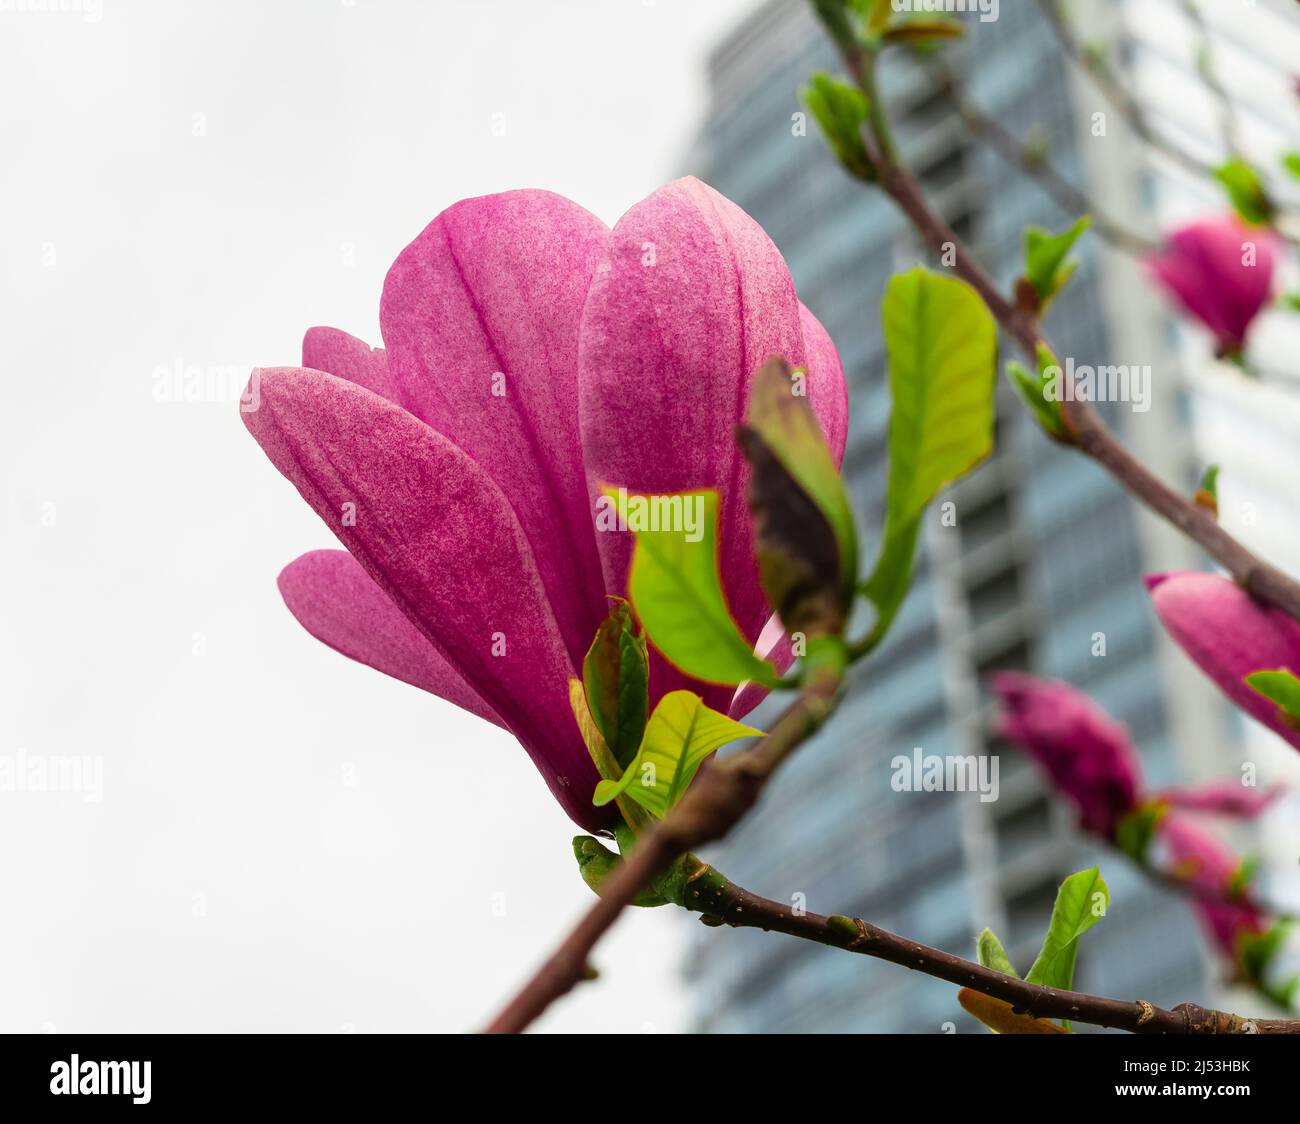 Magnolia liliiflora flower on branch with leaves, Lily magnolia flower in the park. Purple magnolia and flower buds blooming in spring. Nobody, blurre Stock Photo